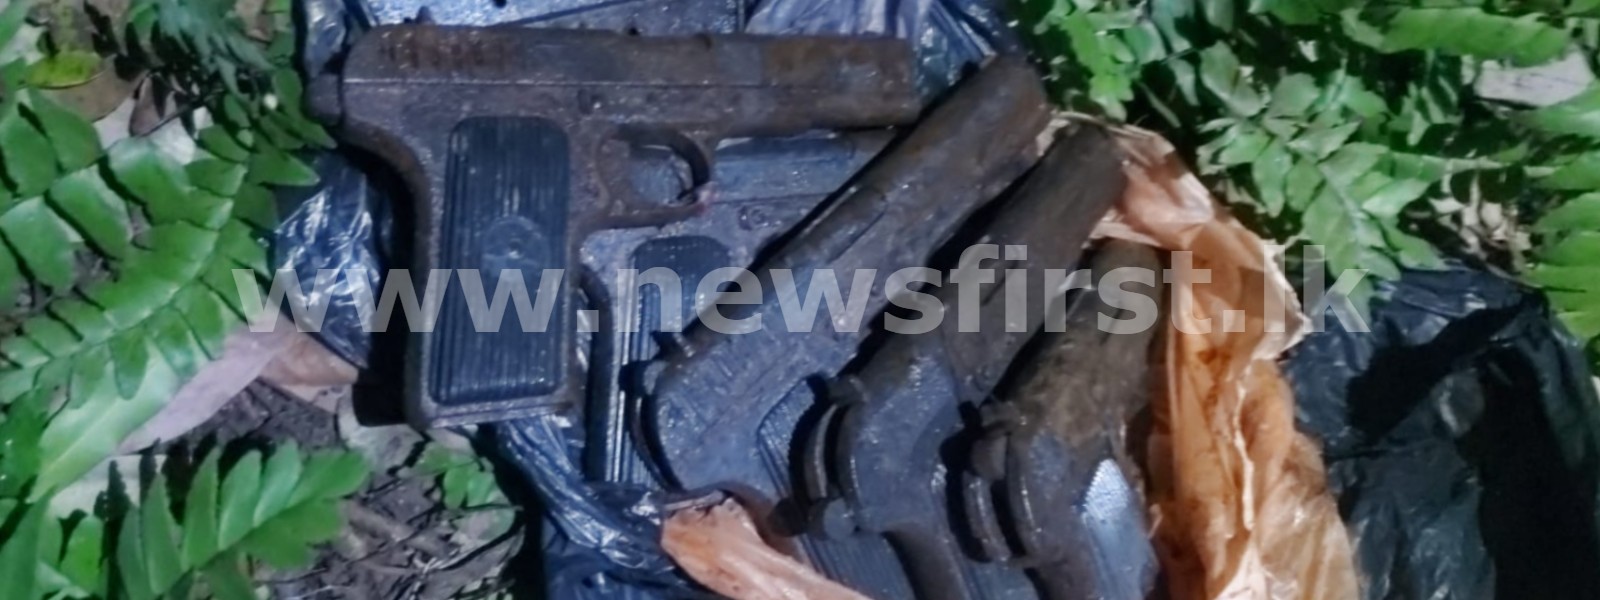 Weapons caches discovered from Weligama